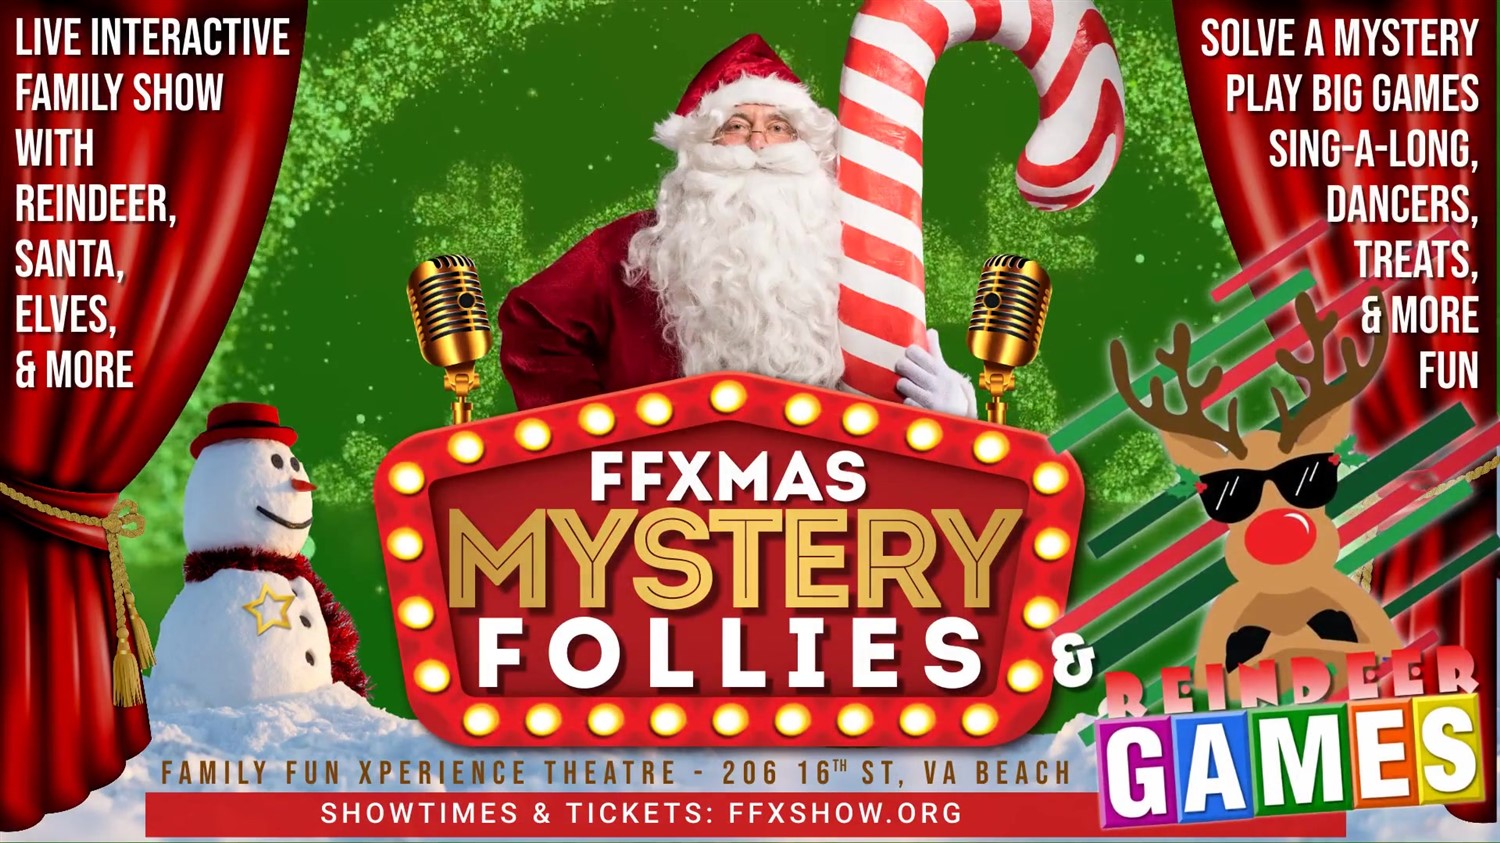 FFXmas MYSTERY FOLLIES Plus Bonus Reindeer Games on Dec 16, 19:00@FFX Theatre - Pick a seat, Buy tickets and Get information on Family Fun Xperience tickets.ffxshow.org